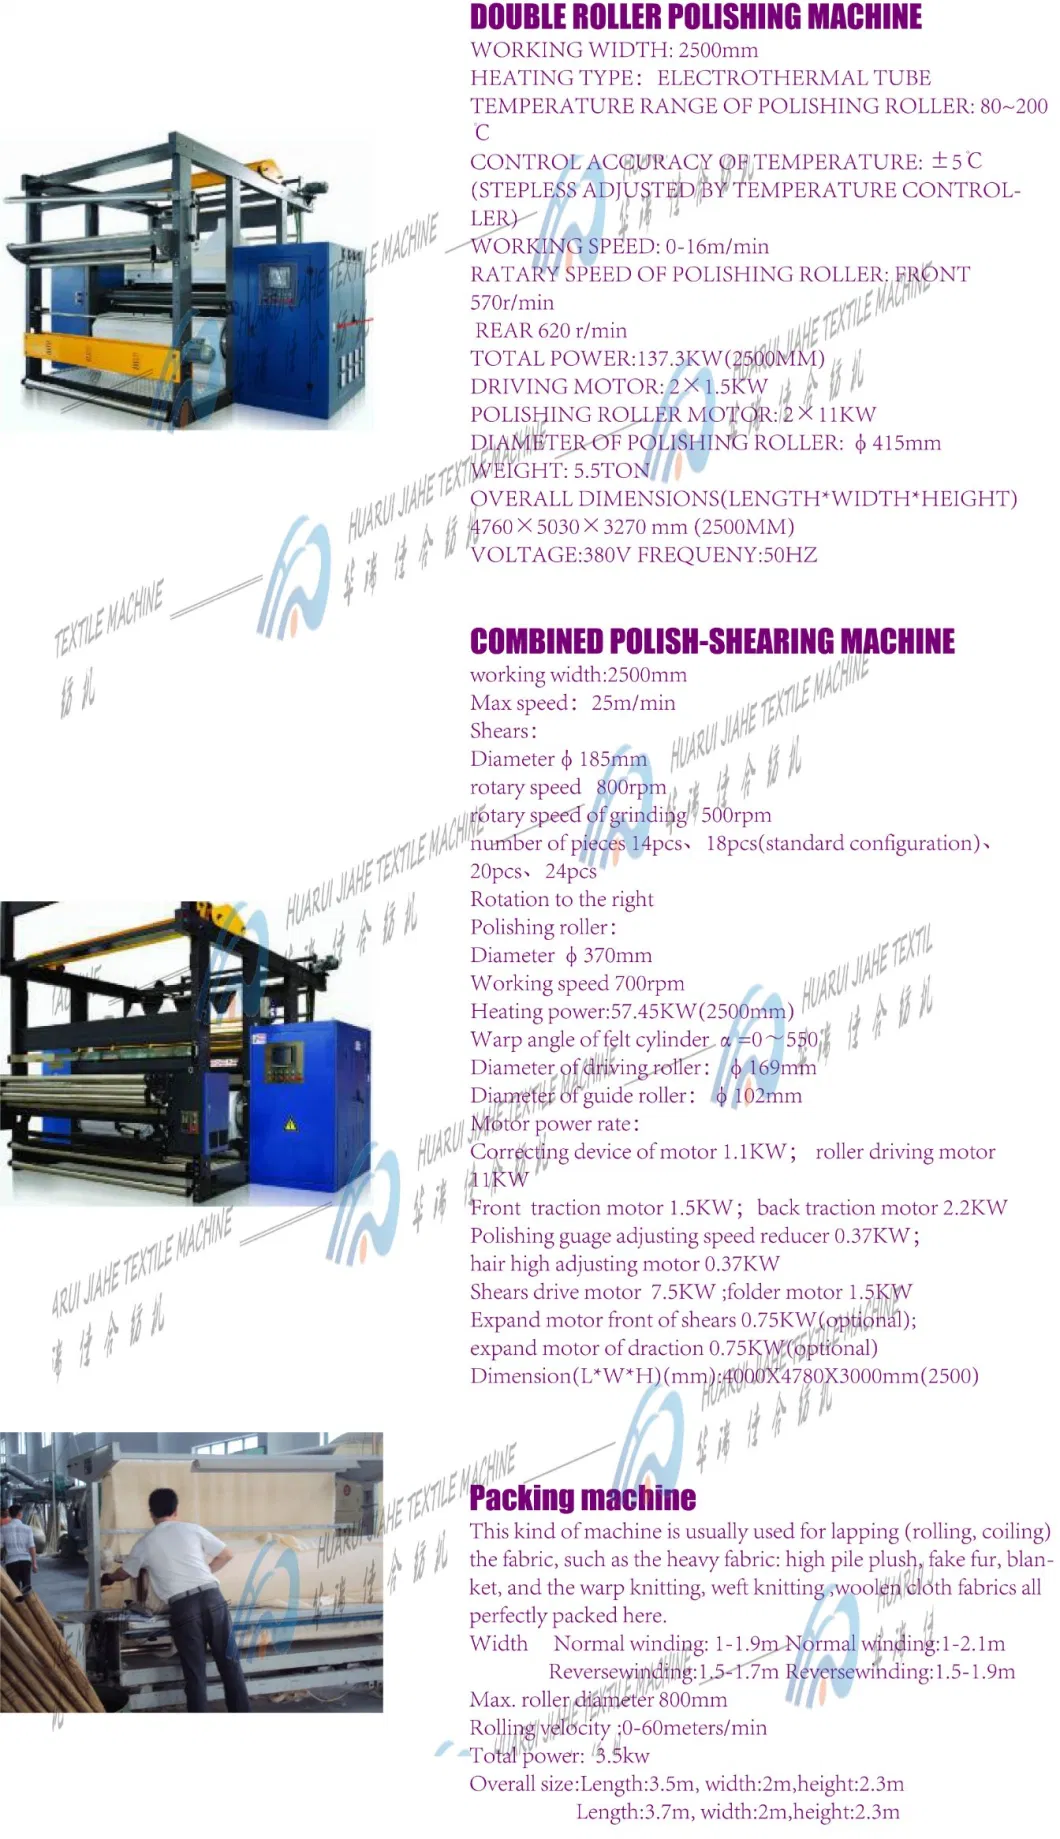 Polyester Brushed Super Soft Burnout Machine and Printing Velboa Fabric for Home Textile/Blanket Burnout CVC Velour Fabric After Treatment